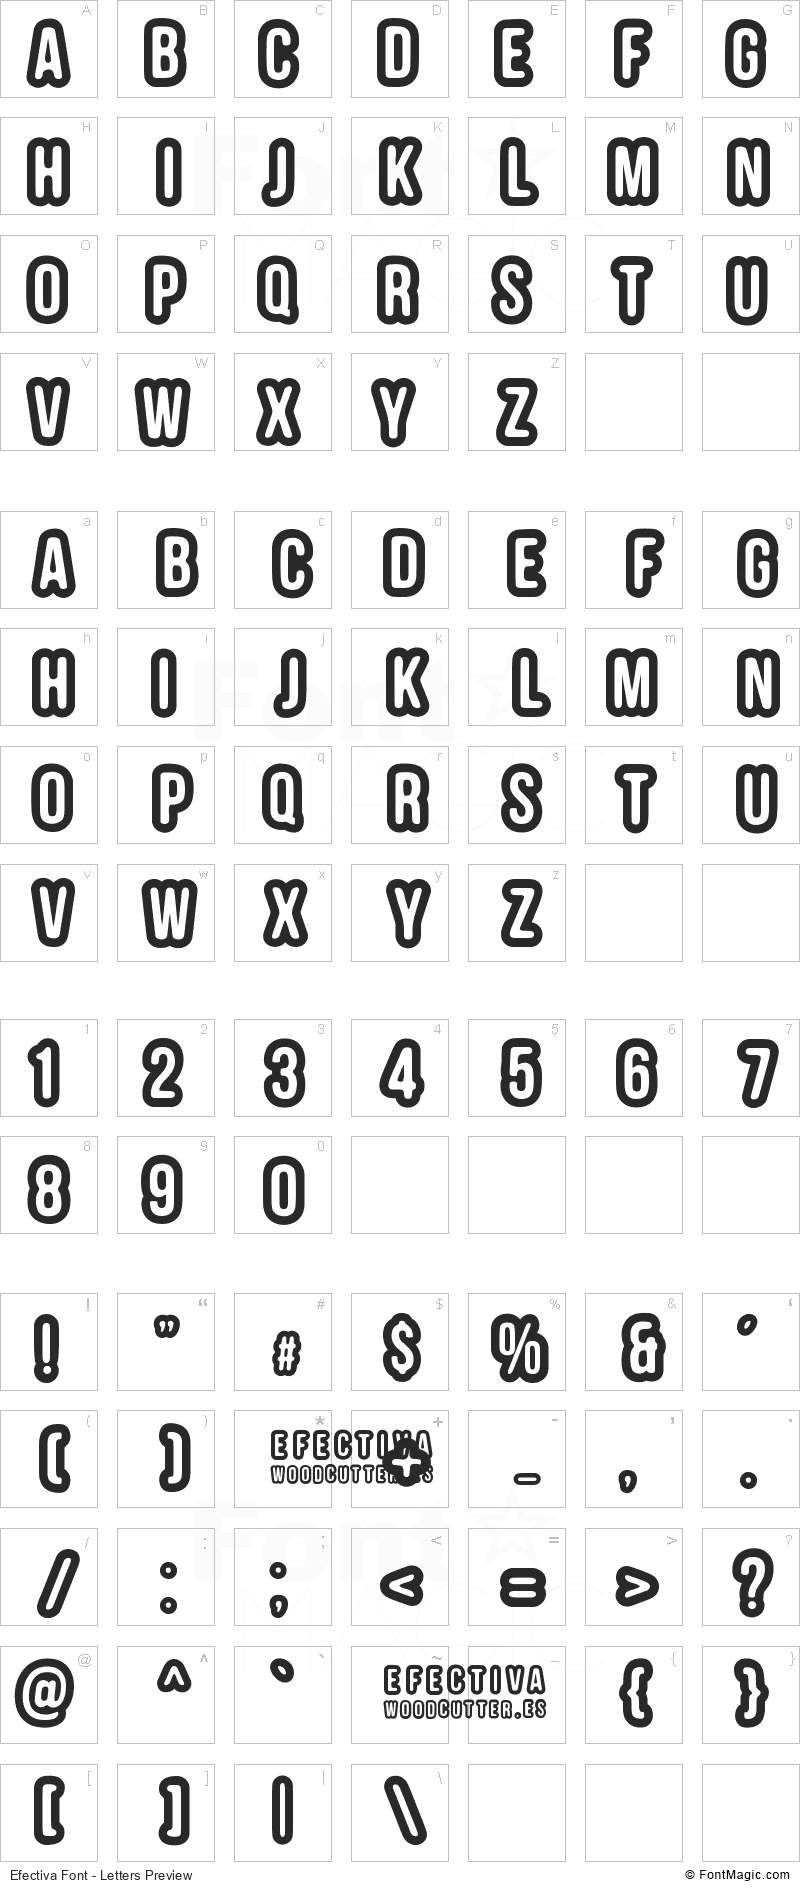 Efectiva Font - All Latters Preview Chart